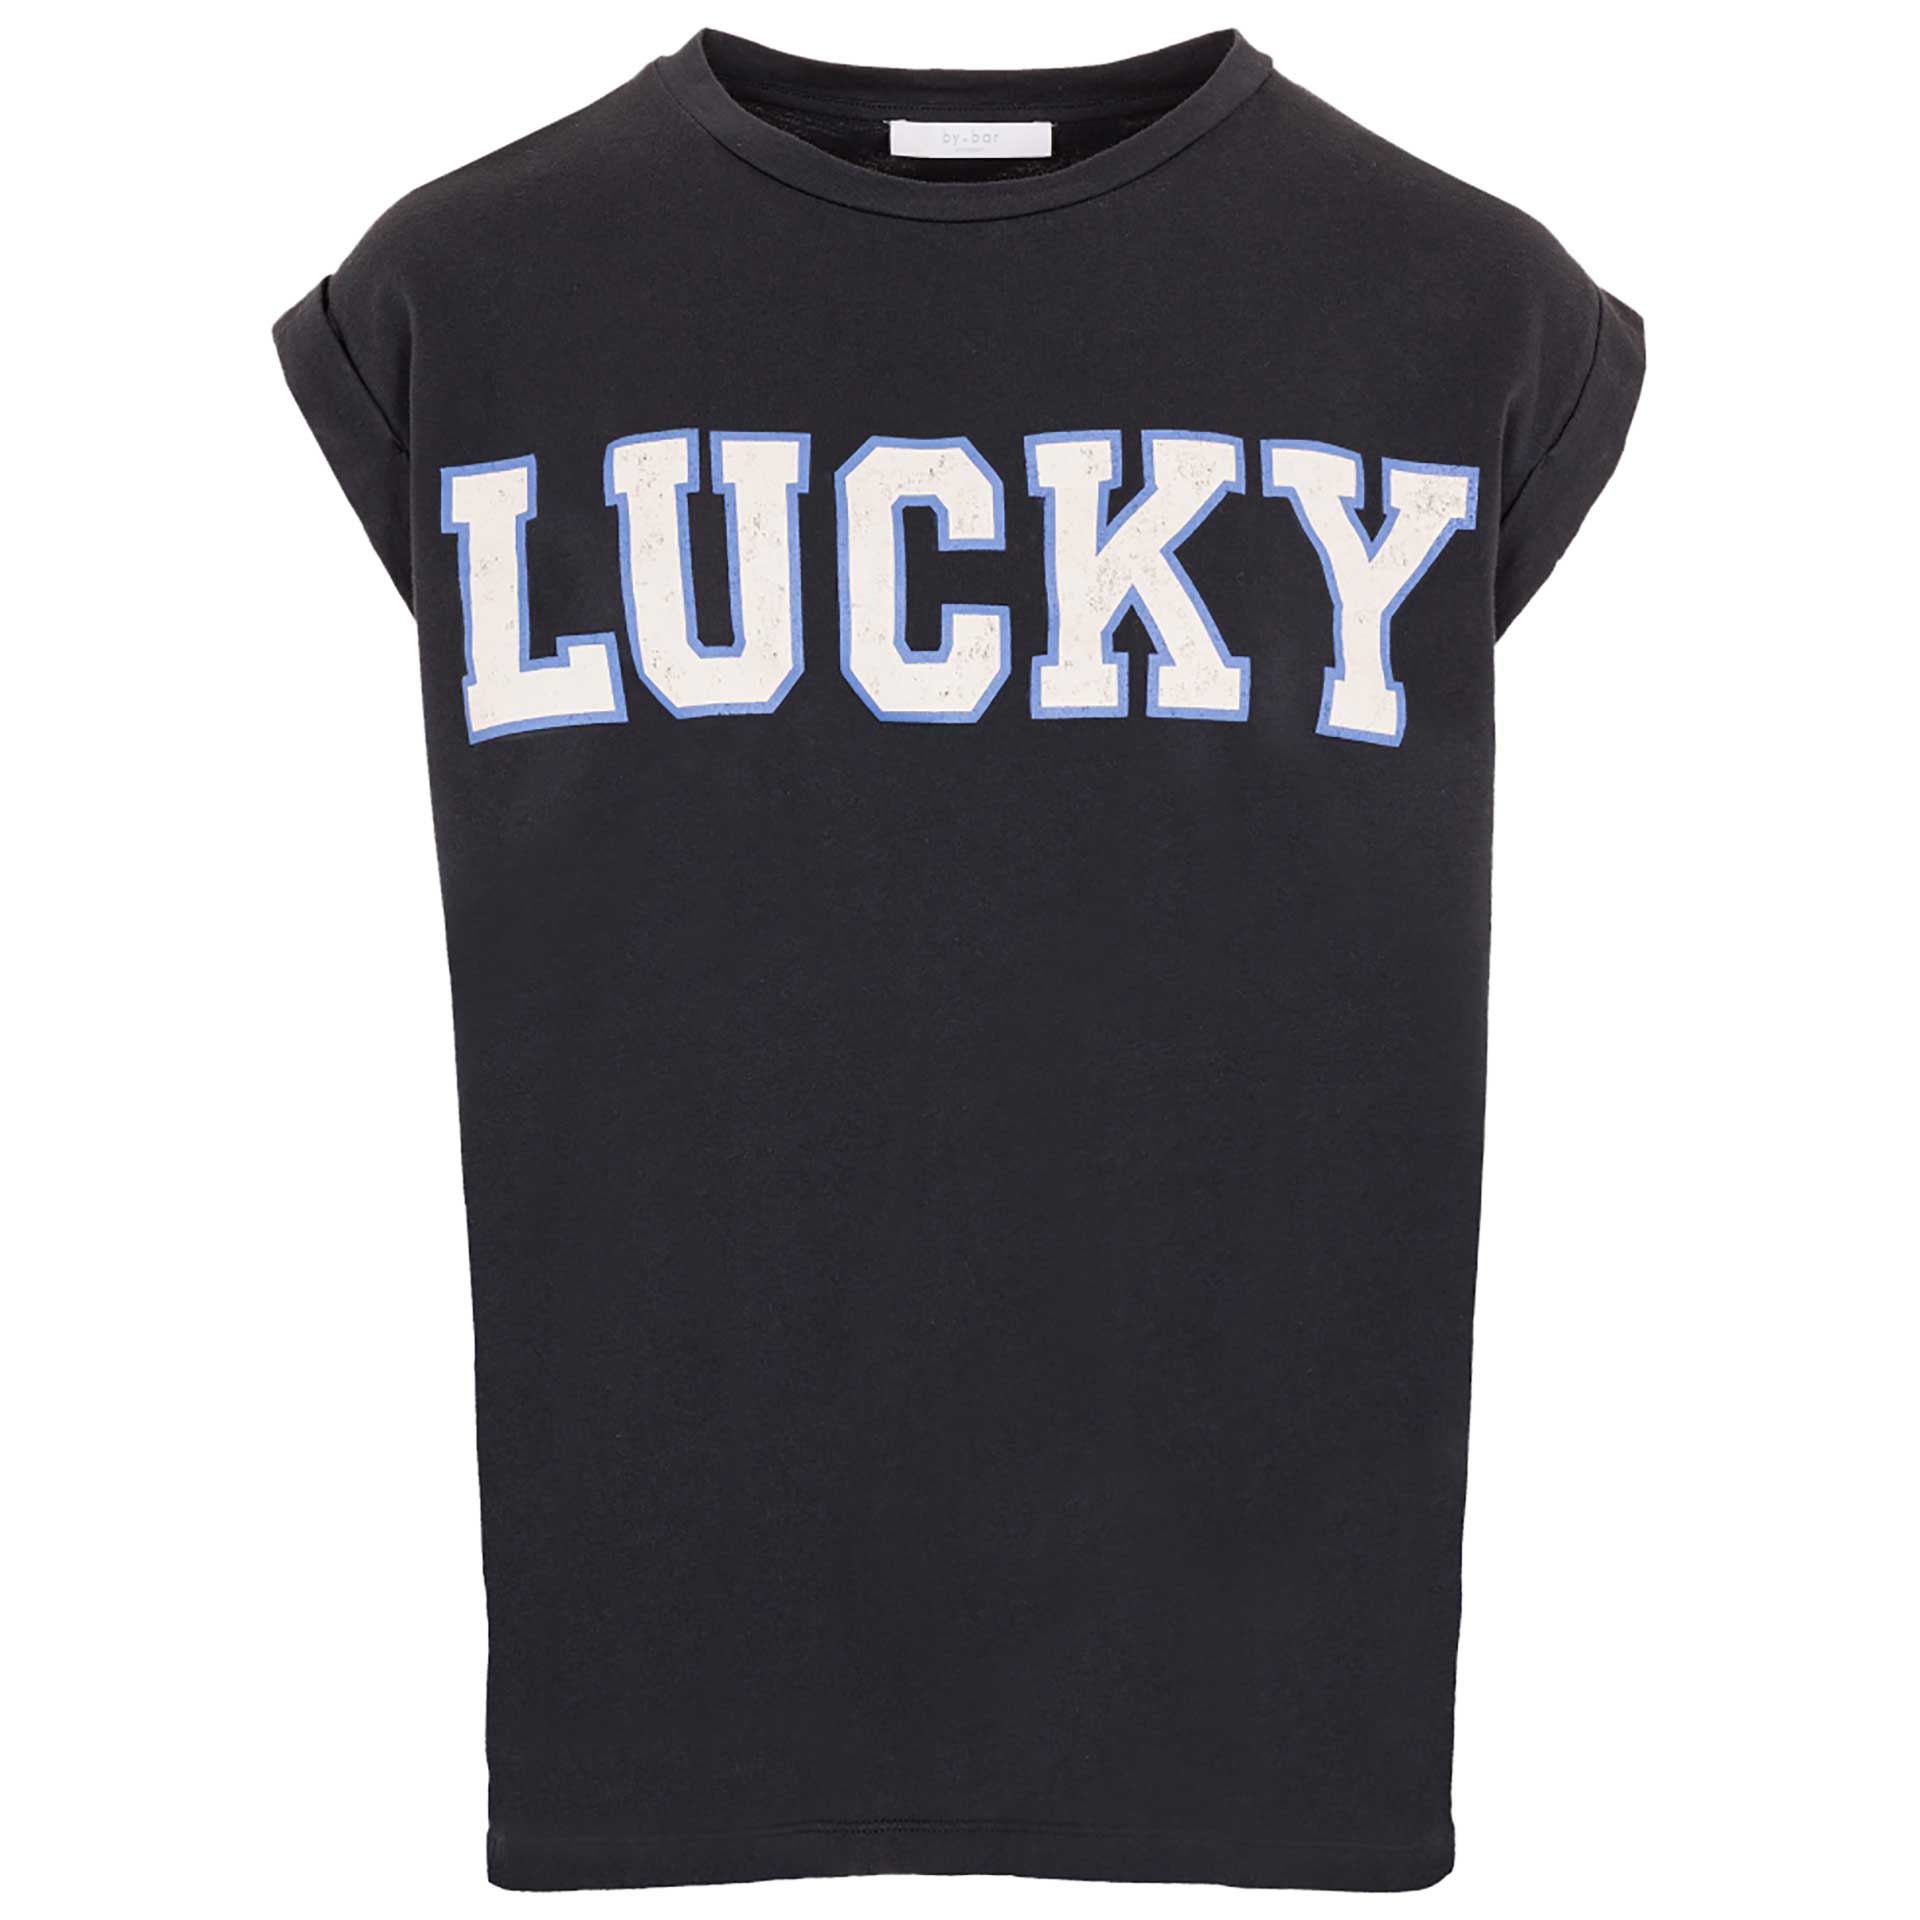 T-shirt Thelma lucky vintage